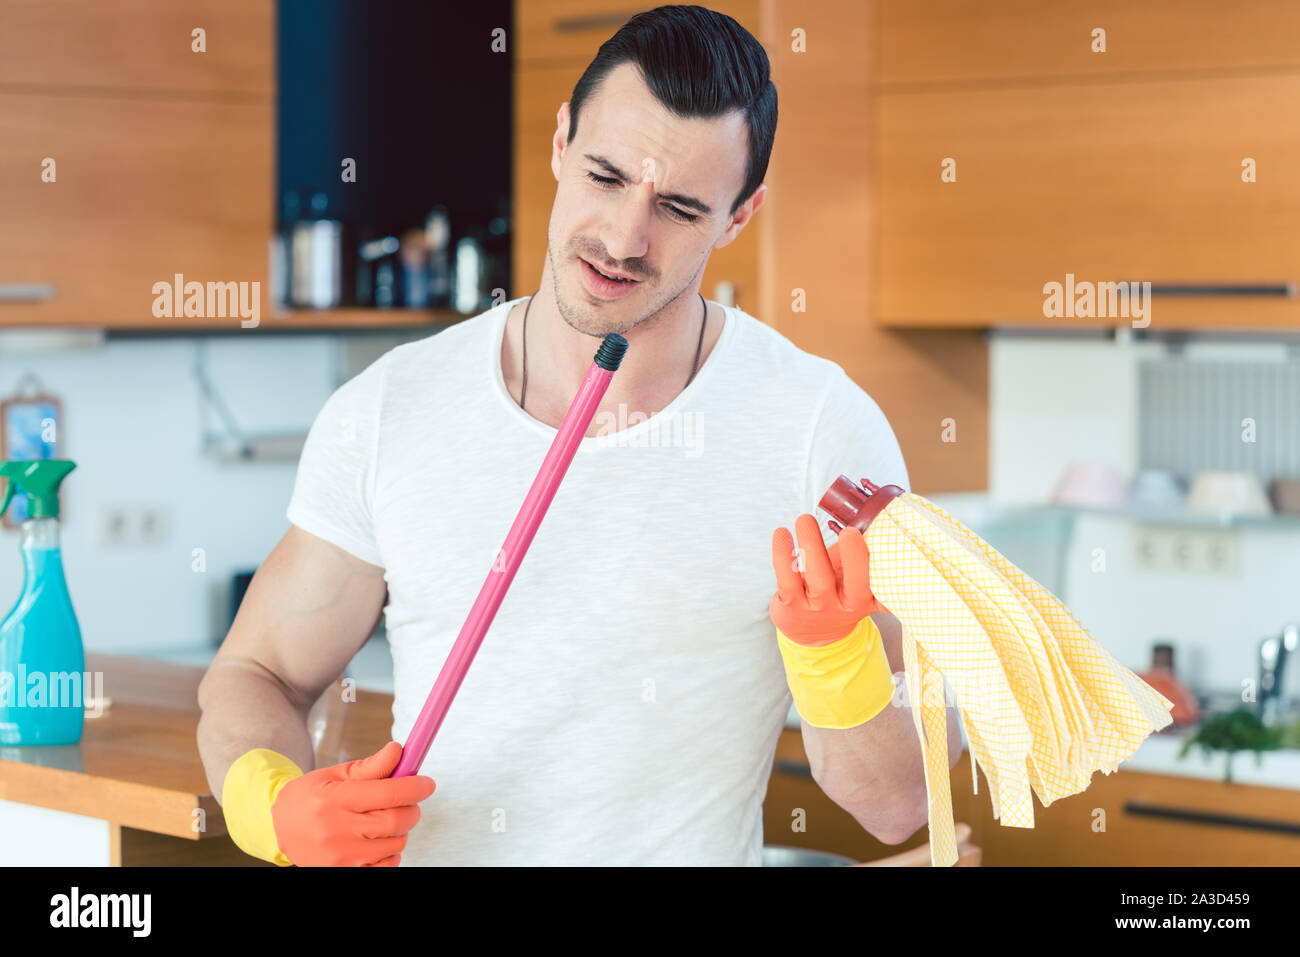 Man is a bit overwhelmed by the duties of a homemaker Stock Photo